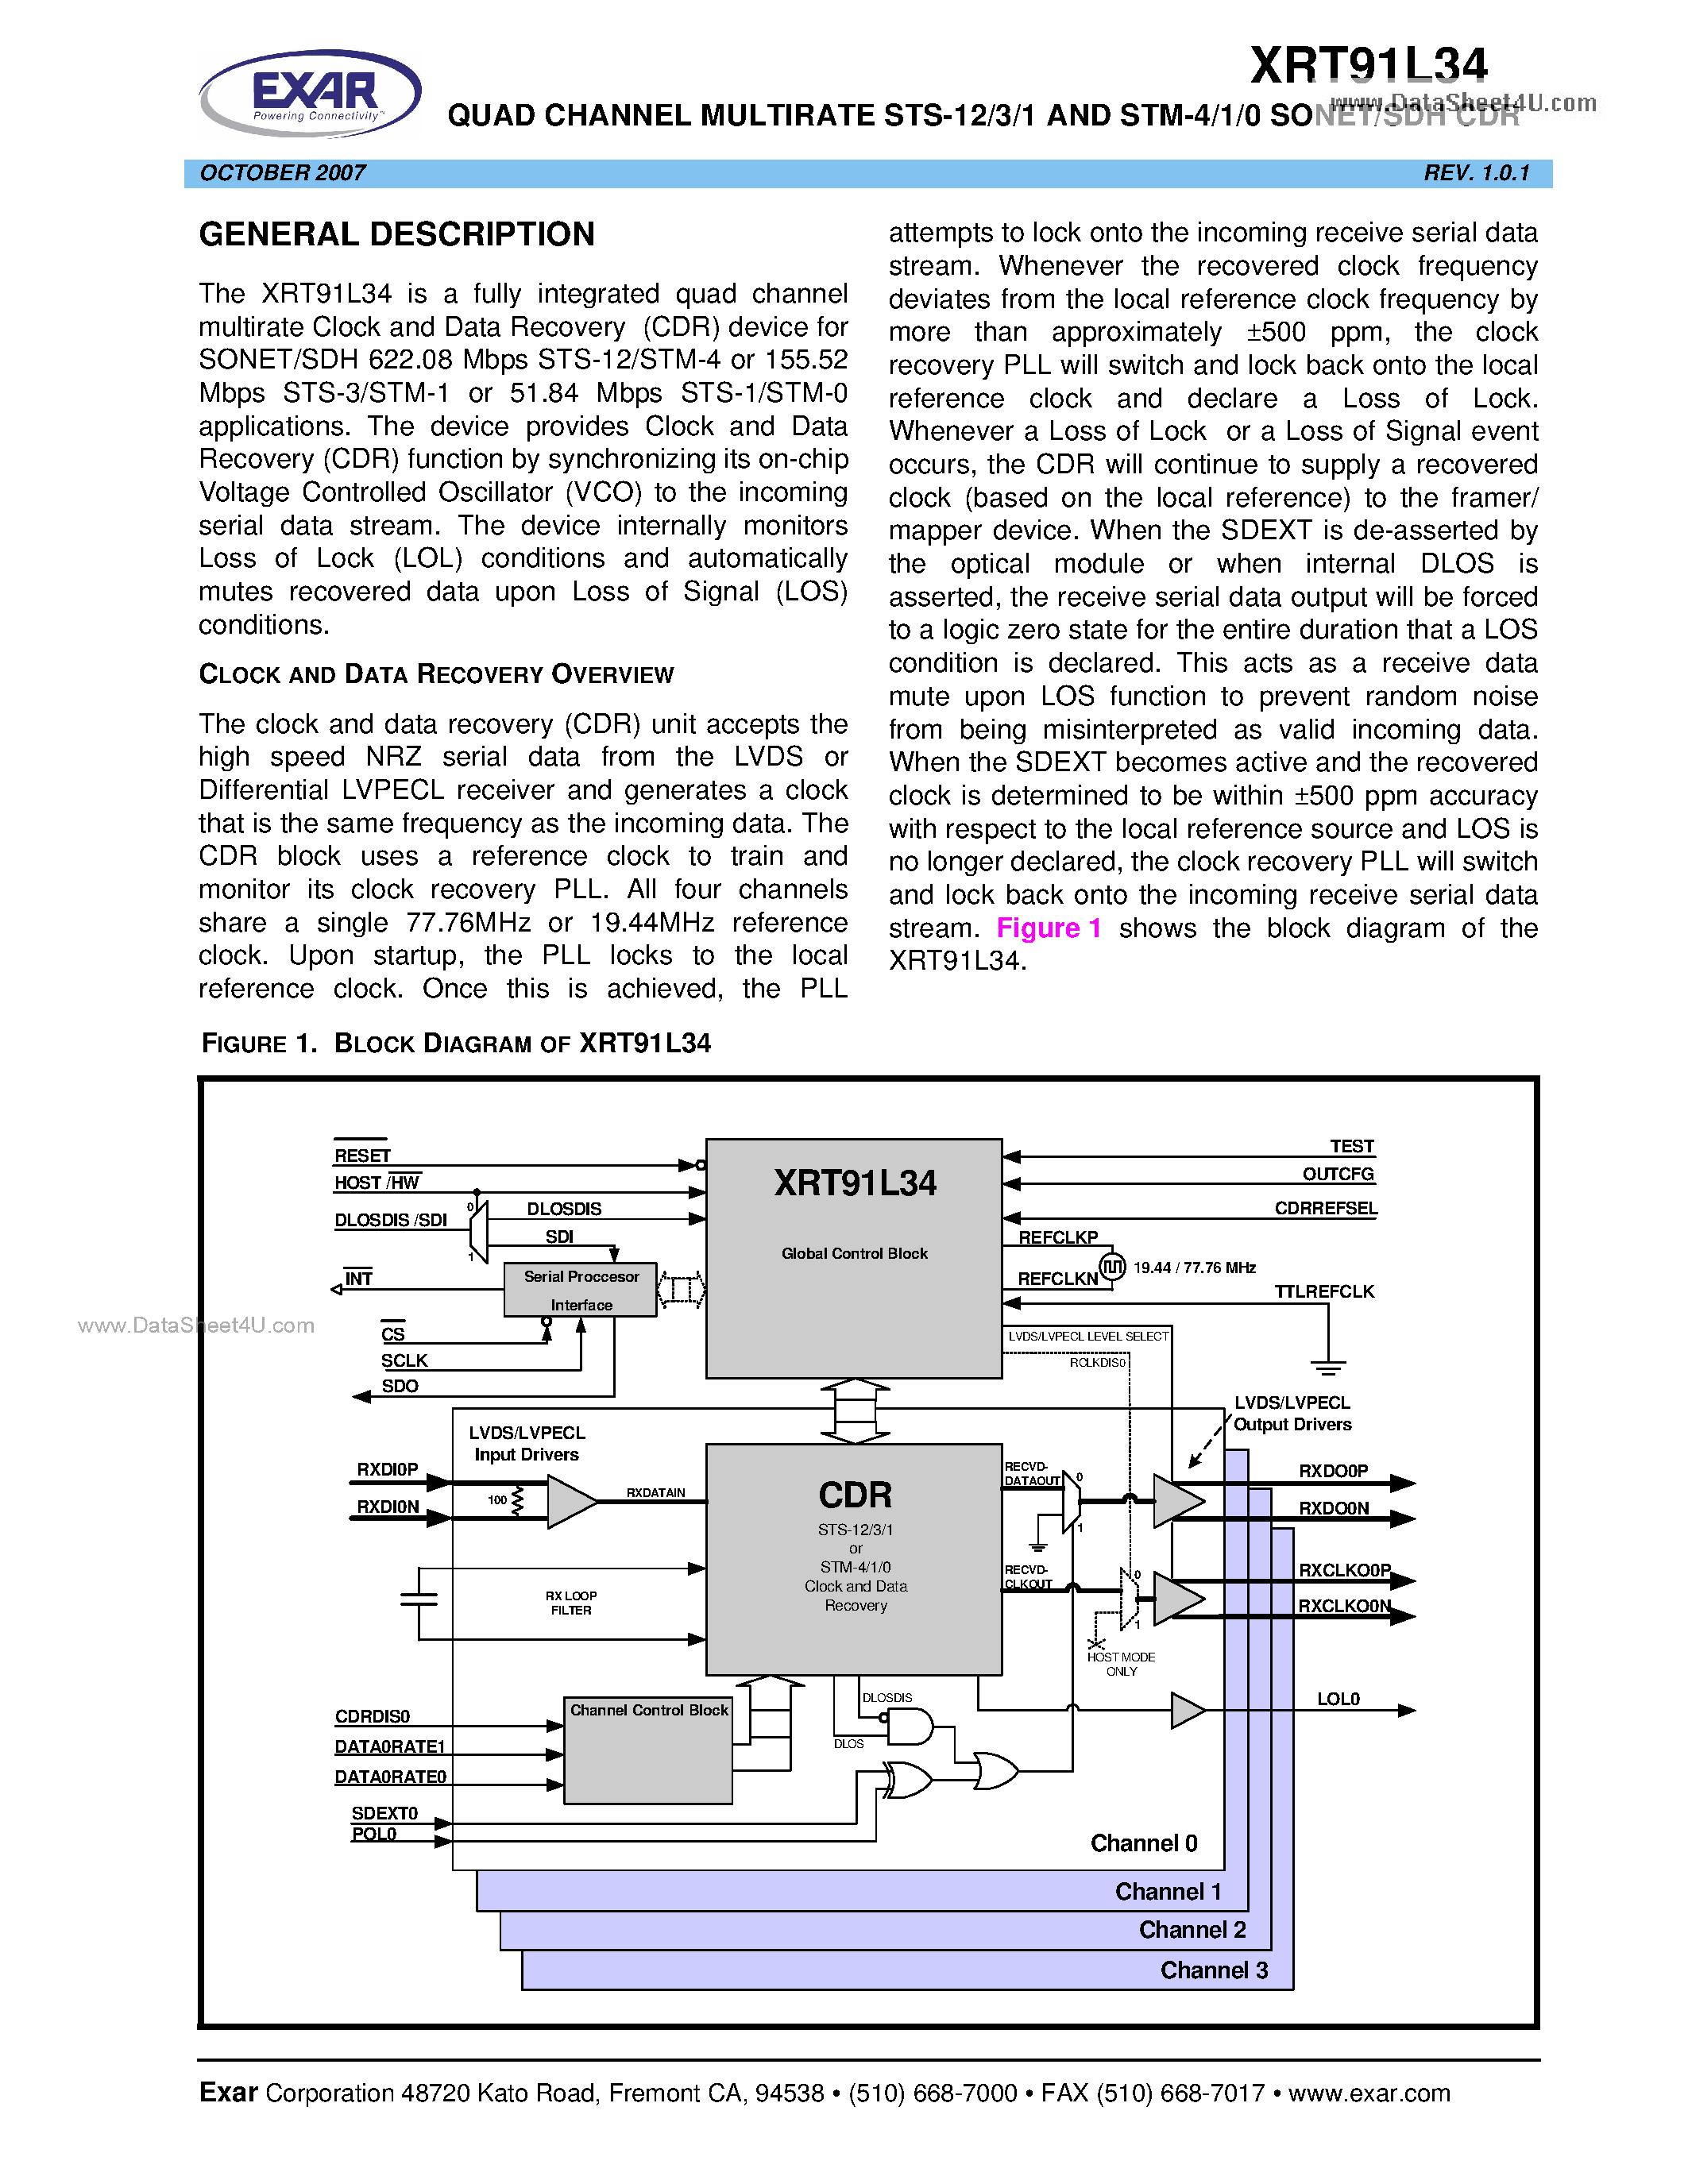 Datasheet XRT91L34 - QUAD CHANNEL MULTIRATE STS-12/3/1 AND STM-4/1/0 SONET/SDH CDR page 1